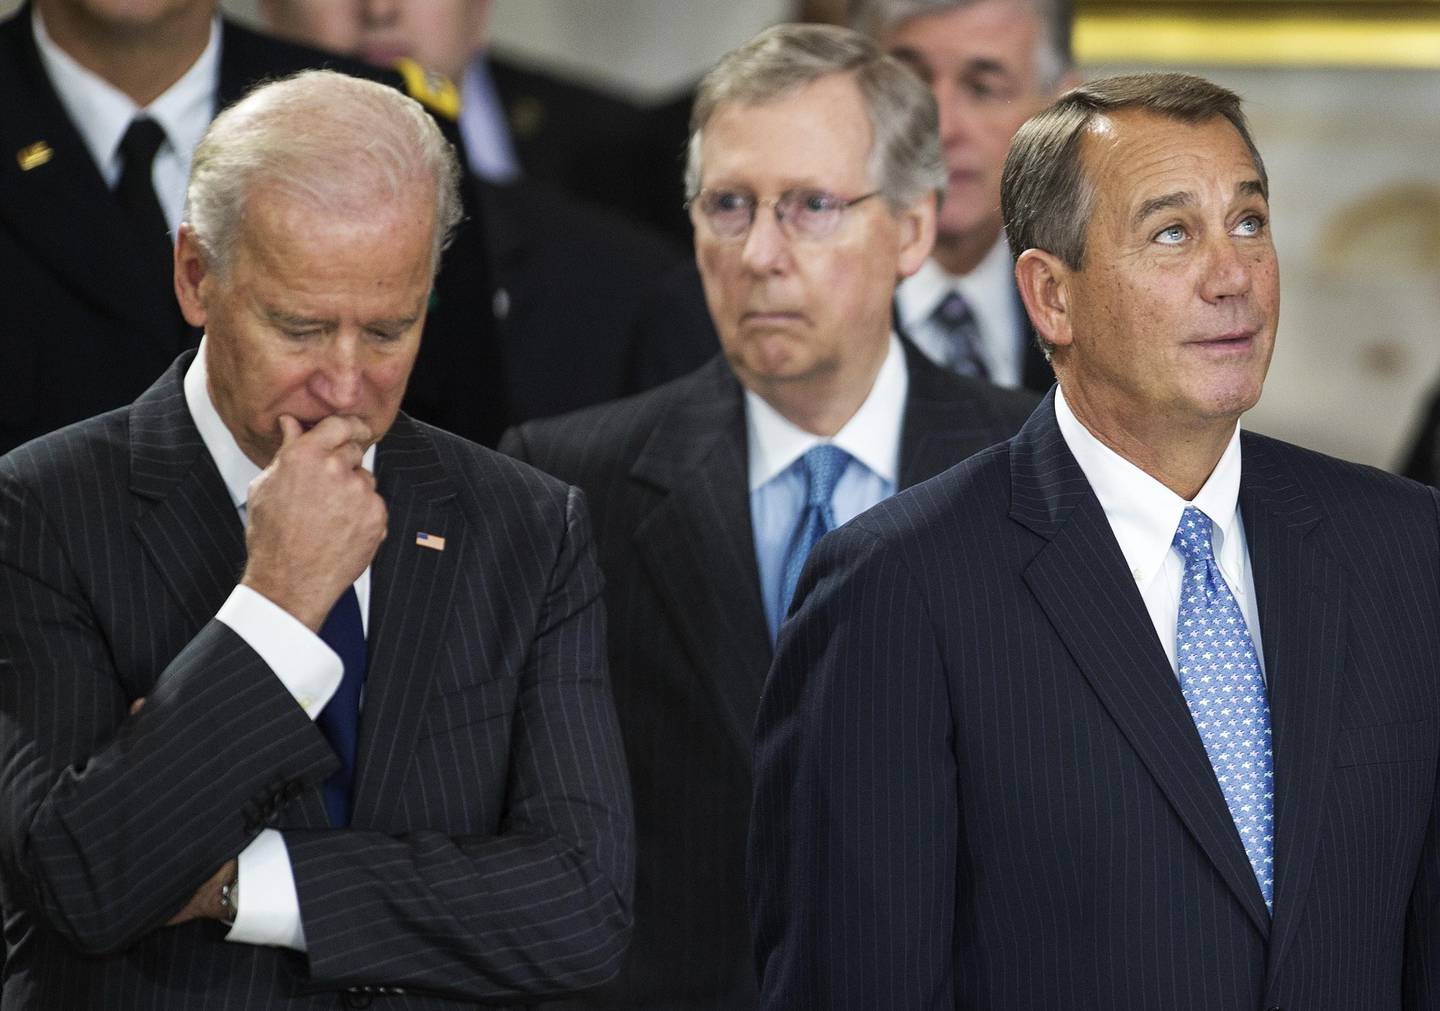 US Vice-President Joe Biden(L), US Speaker of the House John Boehner(R) and Senate Minority Leader Mitch McConnell looks on from the rear as they attend US Senator Daniel K. Inouye,(D-HI), Lying in State with a flag draped casked on the floor of the US Capitol Rotunda December 20, 2012, in Washington, DC.   Democrat Daniel Inouye, one of the last World War II heroes in Congress and the longest-serving member of the US Senate, having represented Hawaii since the state joined the union, died at age 88. AFP PHOTO/Paul J. Richards